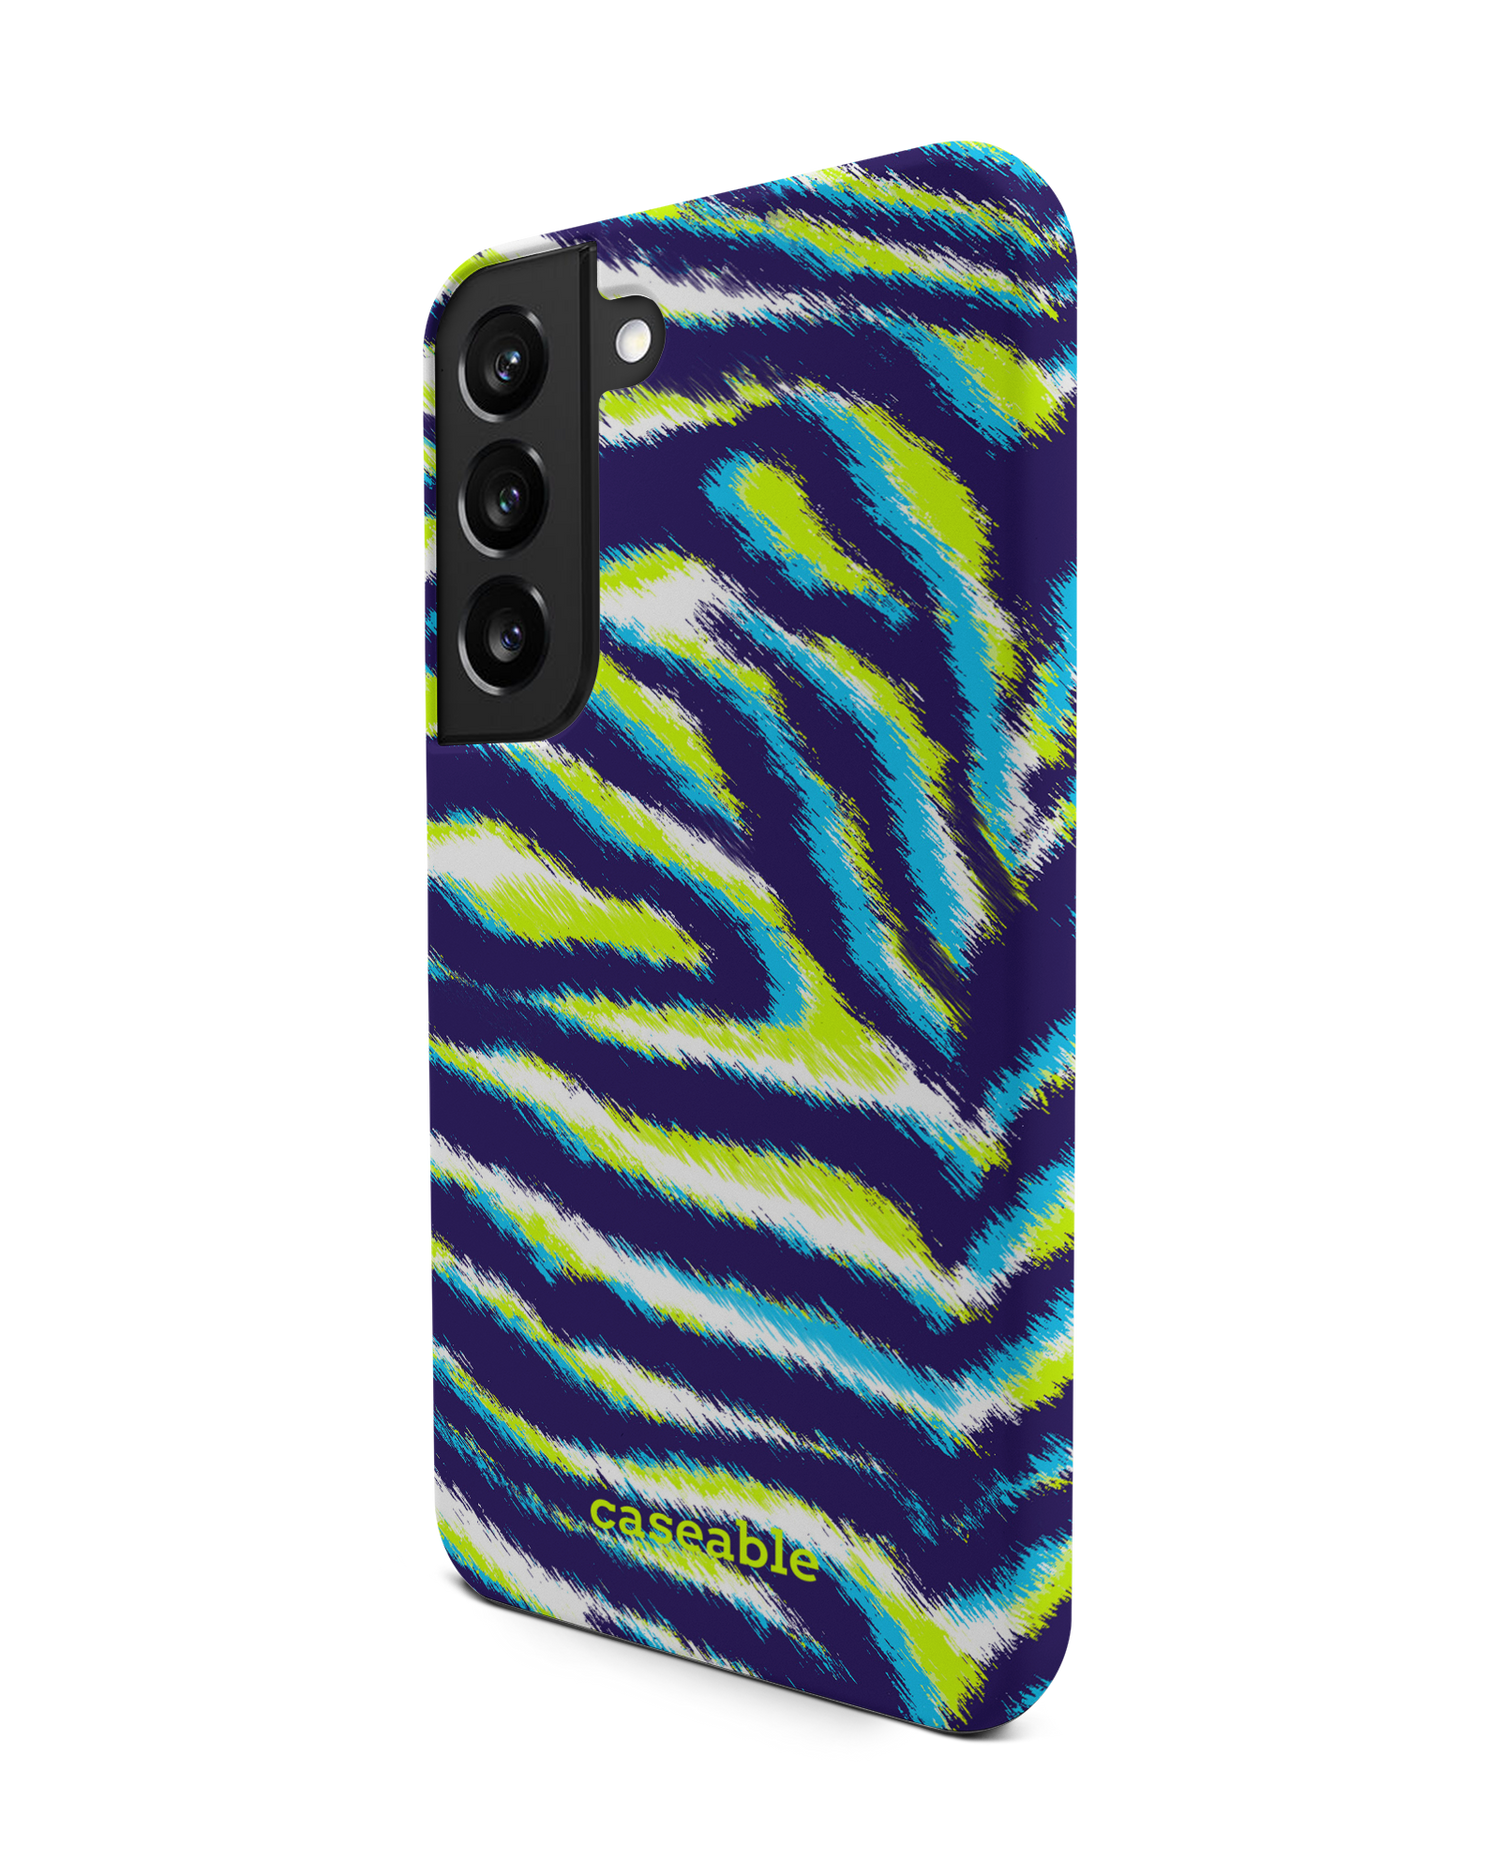 Neon Zebra Premium Phone Case Samsung Galaxy S22 5G: View from the right side